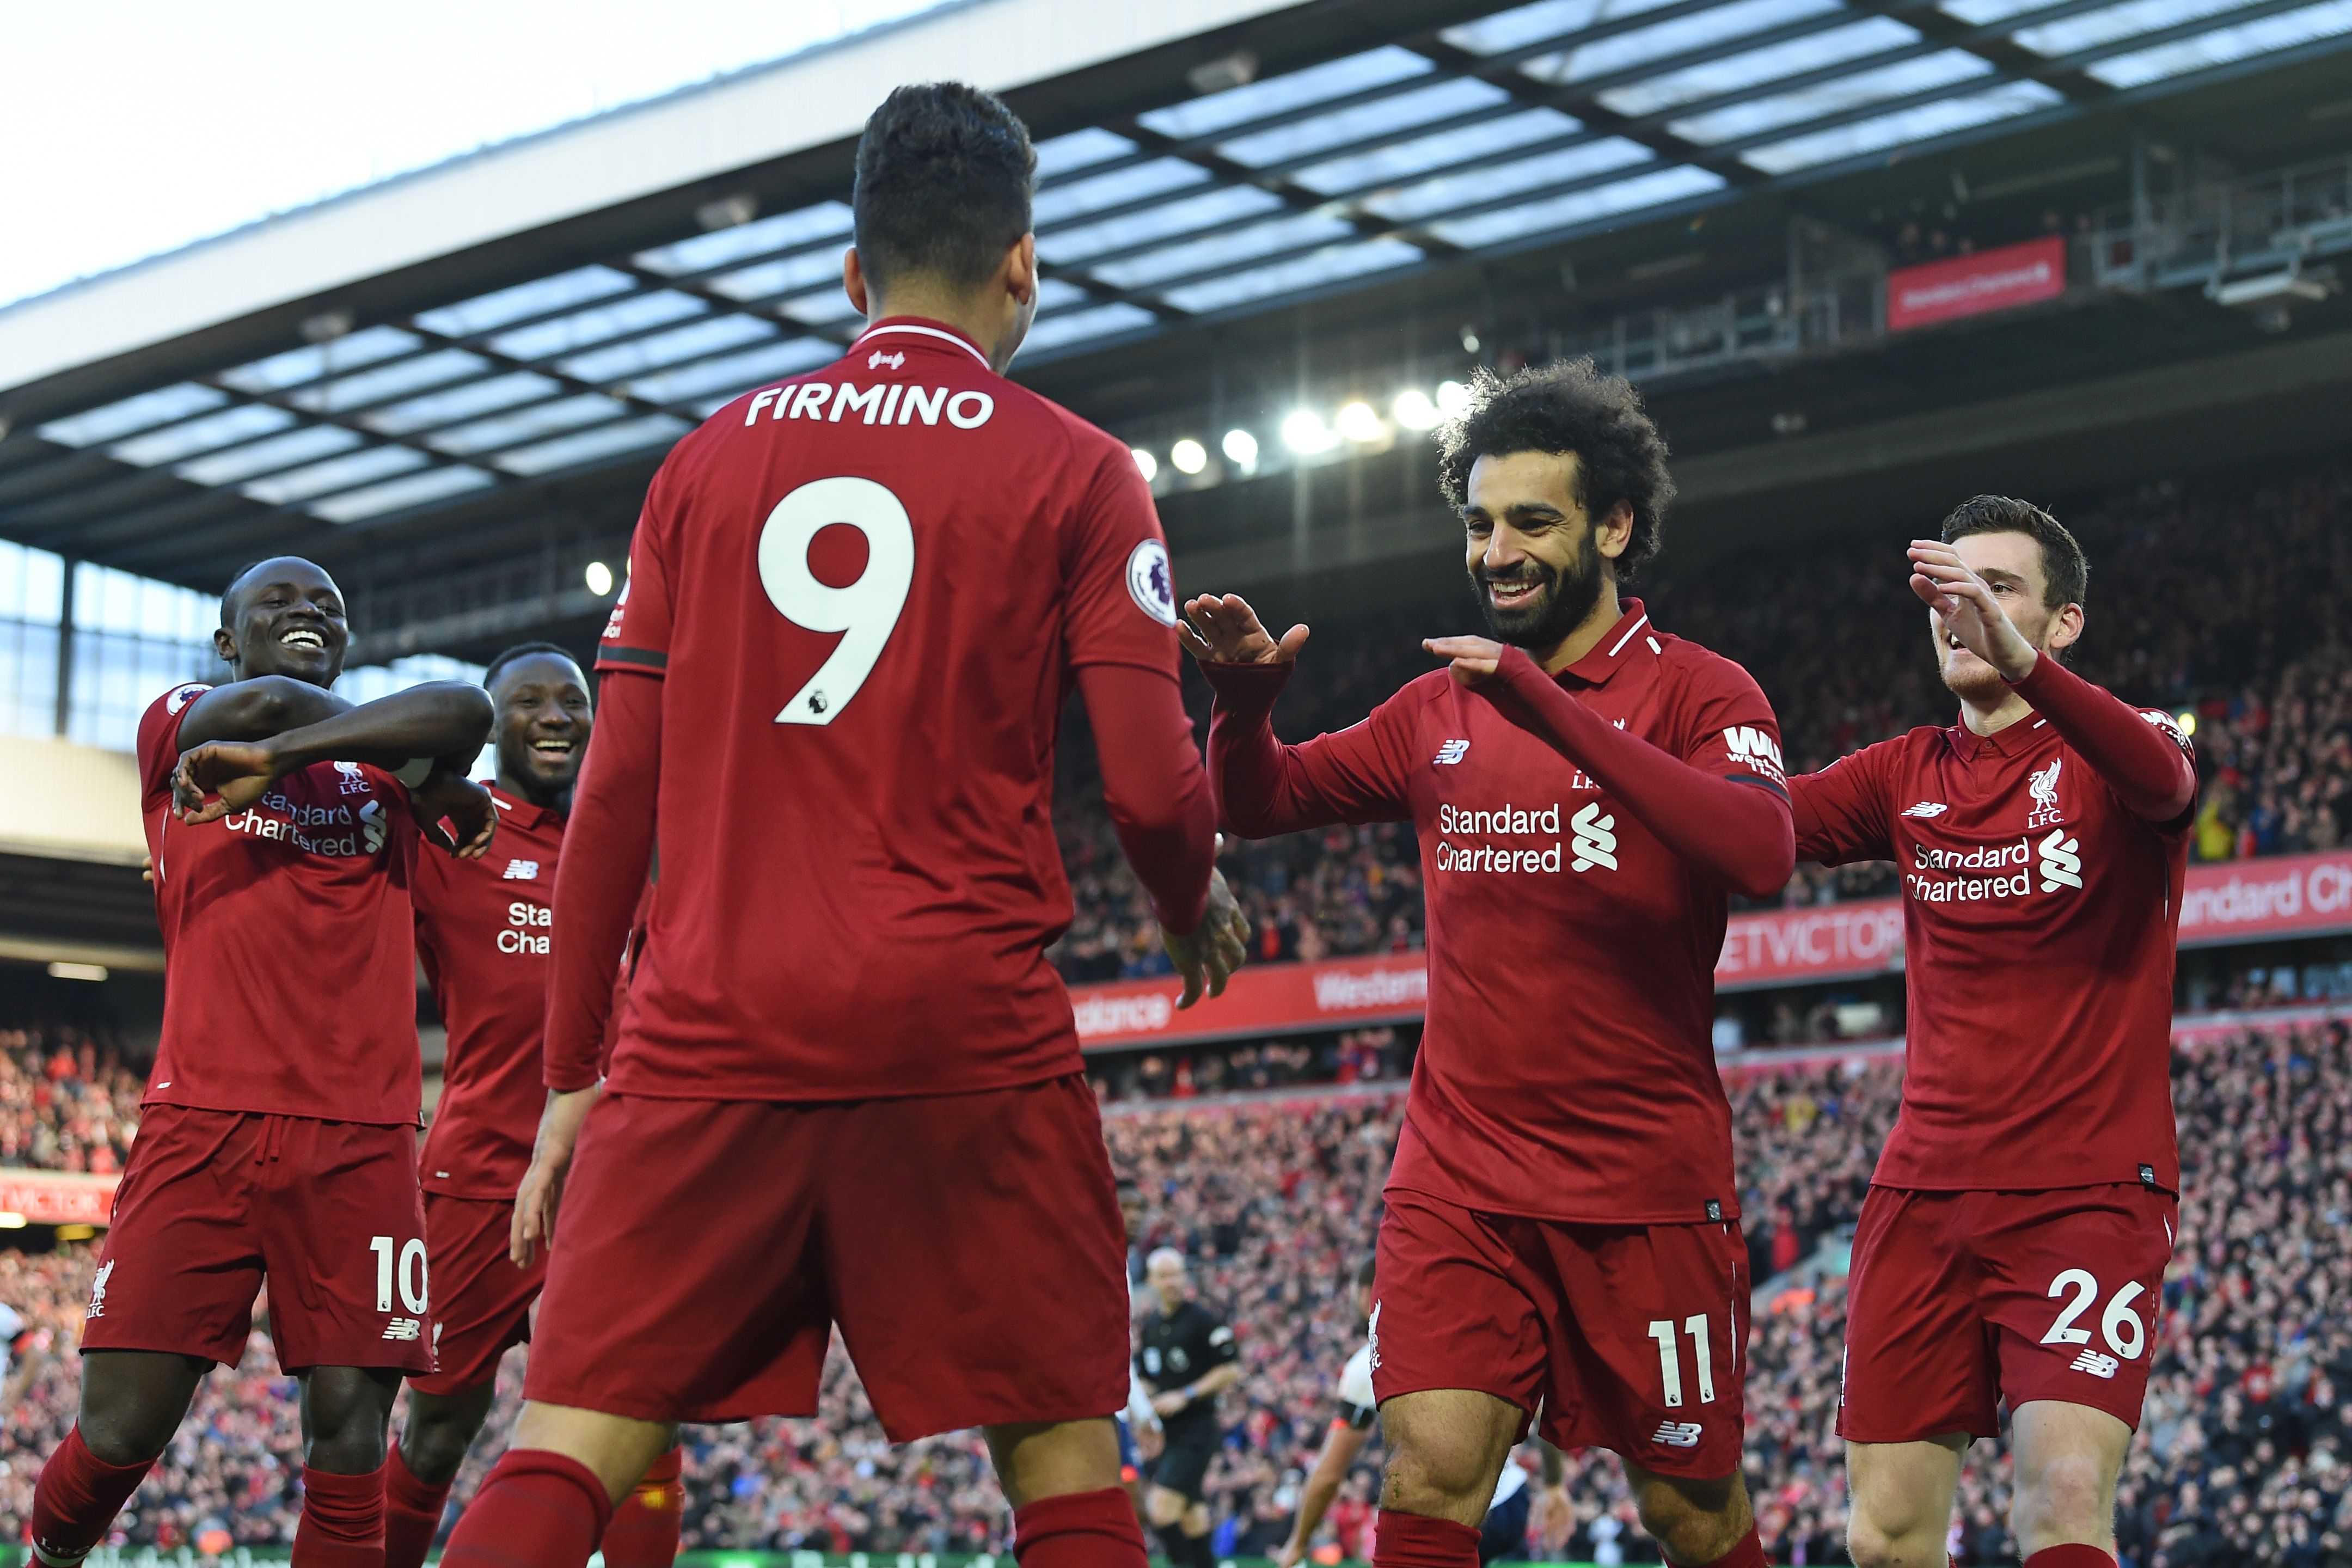 Liverpool's Egyptian midfielder Mohamed Salah (2nd R) celebrates with teammates after scoring their third goal during the English Premier League football match between Liverpool and Bournemouth at Anfield in Liverpool, north west England on February 9, 2019. (Photo by Paul ELLIS / AFP) / RESTRICTED TO EDITORIAL USE. No use with unauthorized audio, video, data, fixture lists, club/league logos or 'live' services. Online in-match use limited to 120 images. An additional 40 images may be used in extra time. No video emulation. Social media in-match use limited to 120 images. An additional 40 images may be used in extra time. No use in betting publications, games or single club/league/player publications. /         (Photo credit should read PAUL ELLIS/AFP/Getty Images)